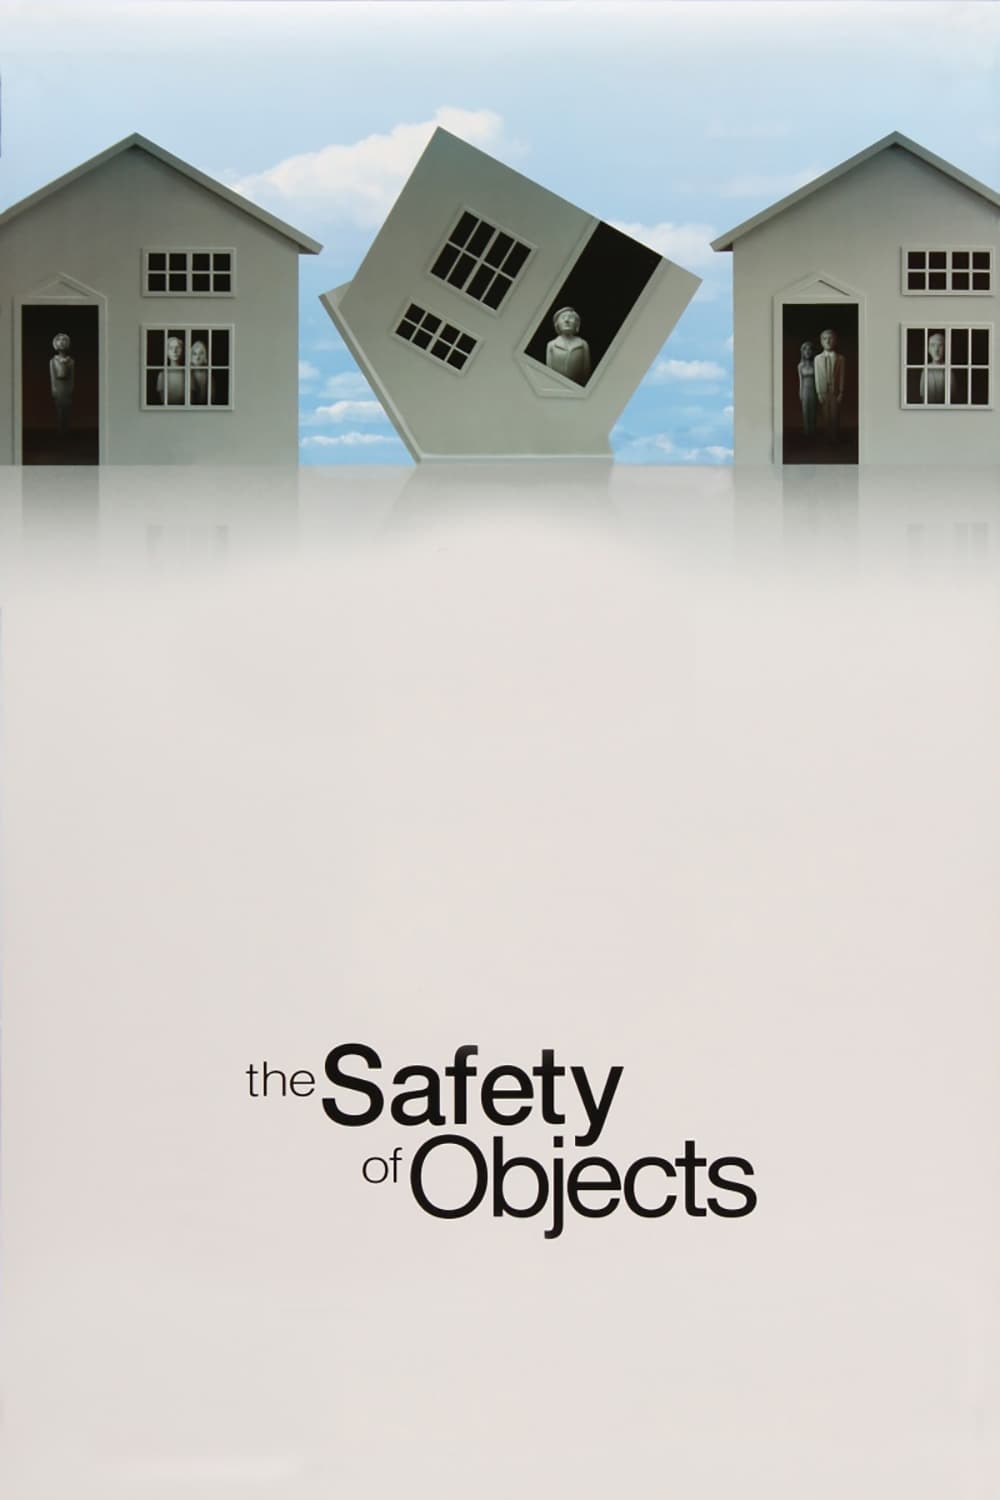 The Safety of Objects (2002)